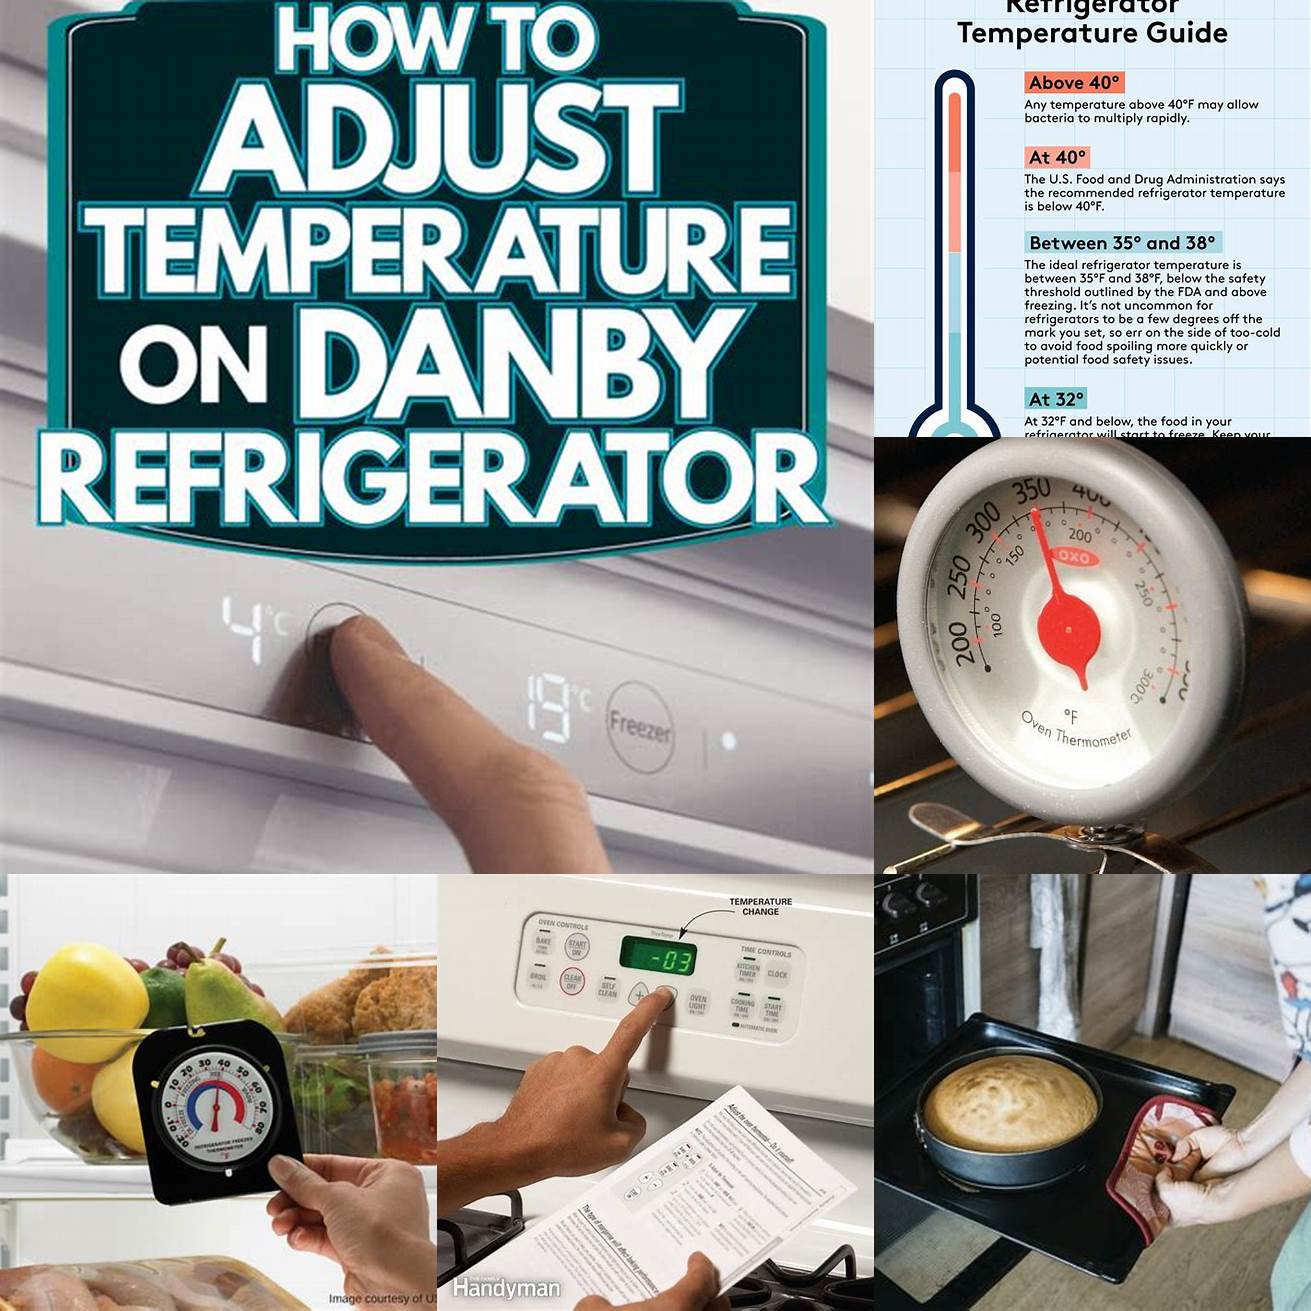 4 Adjust the temperature Cabin temperatures can be unpredictable so bring layers to adjust as needed